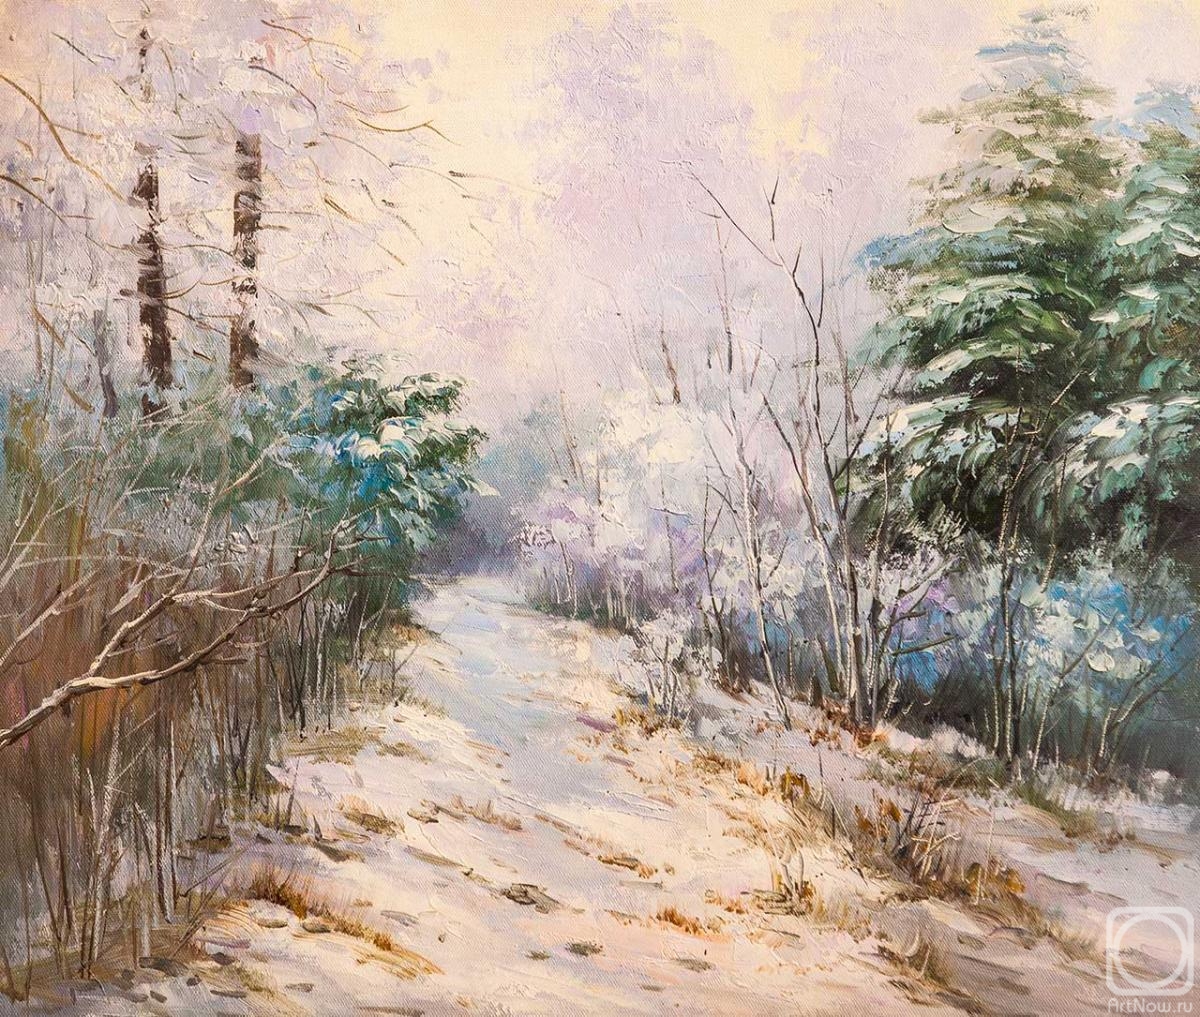 Sharabarin Andrey. Path in the winter forest